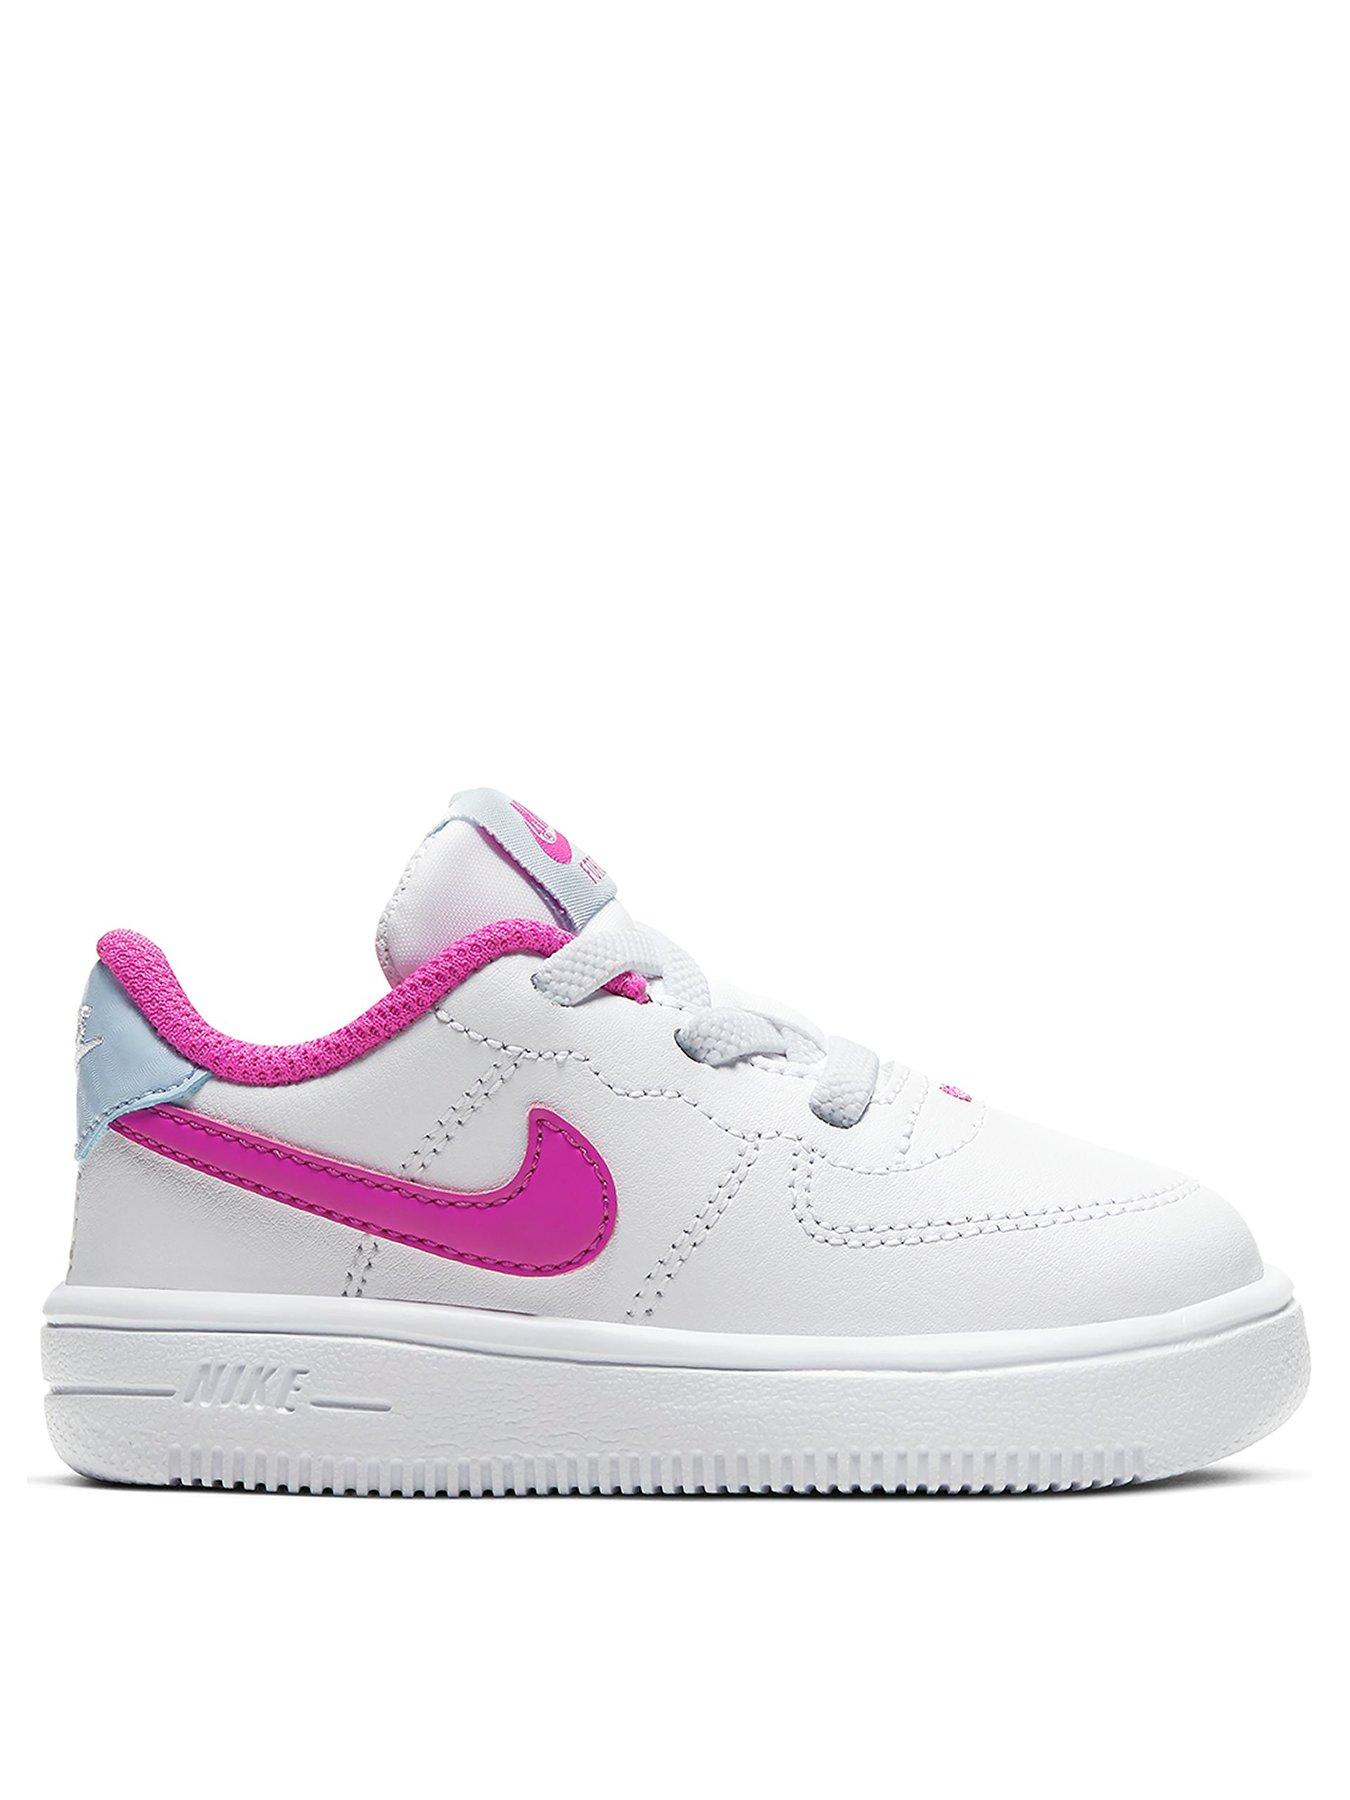 Nike Air Force 1 '18 Infant Trainers 